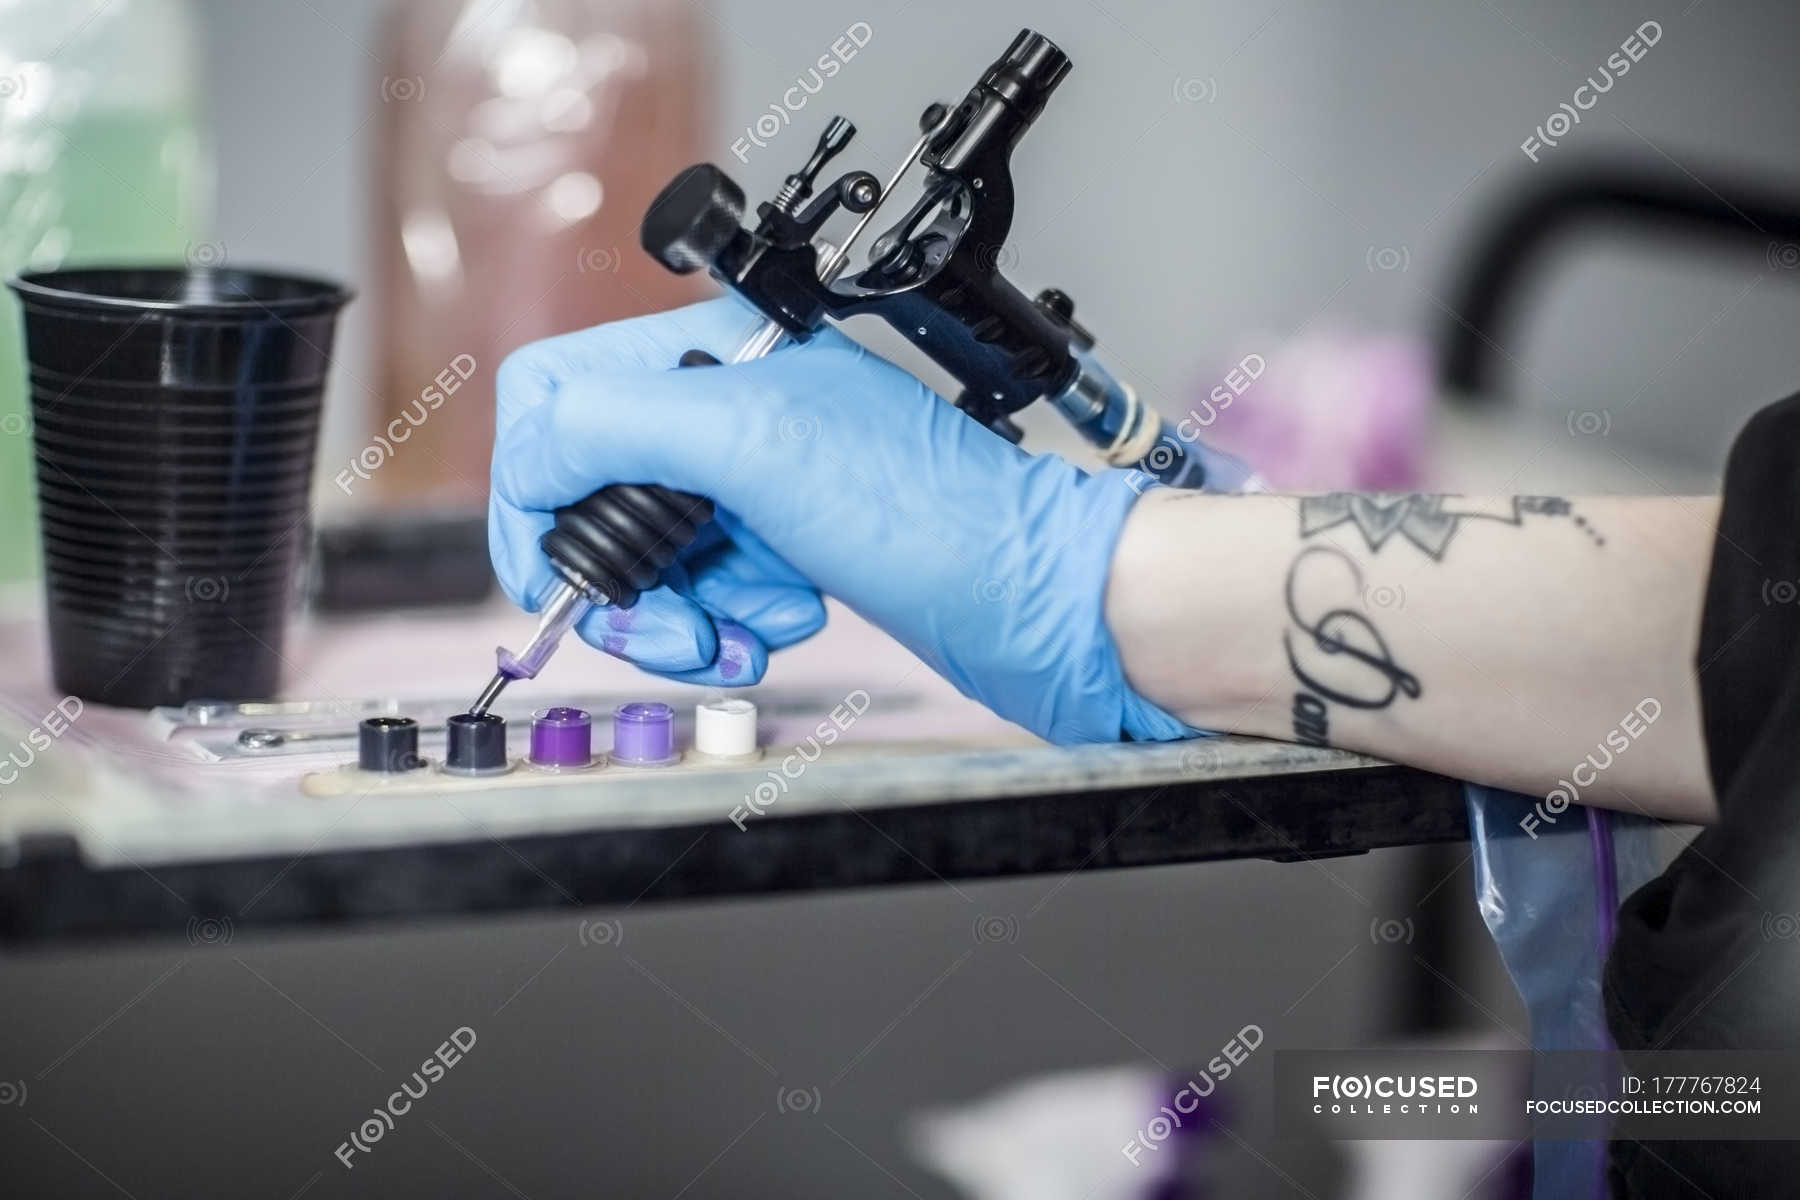 How to Prepare for a Tattoo 10 Essential Tips  Female Tattooers